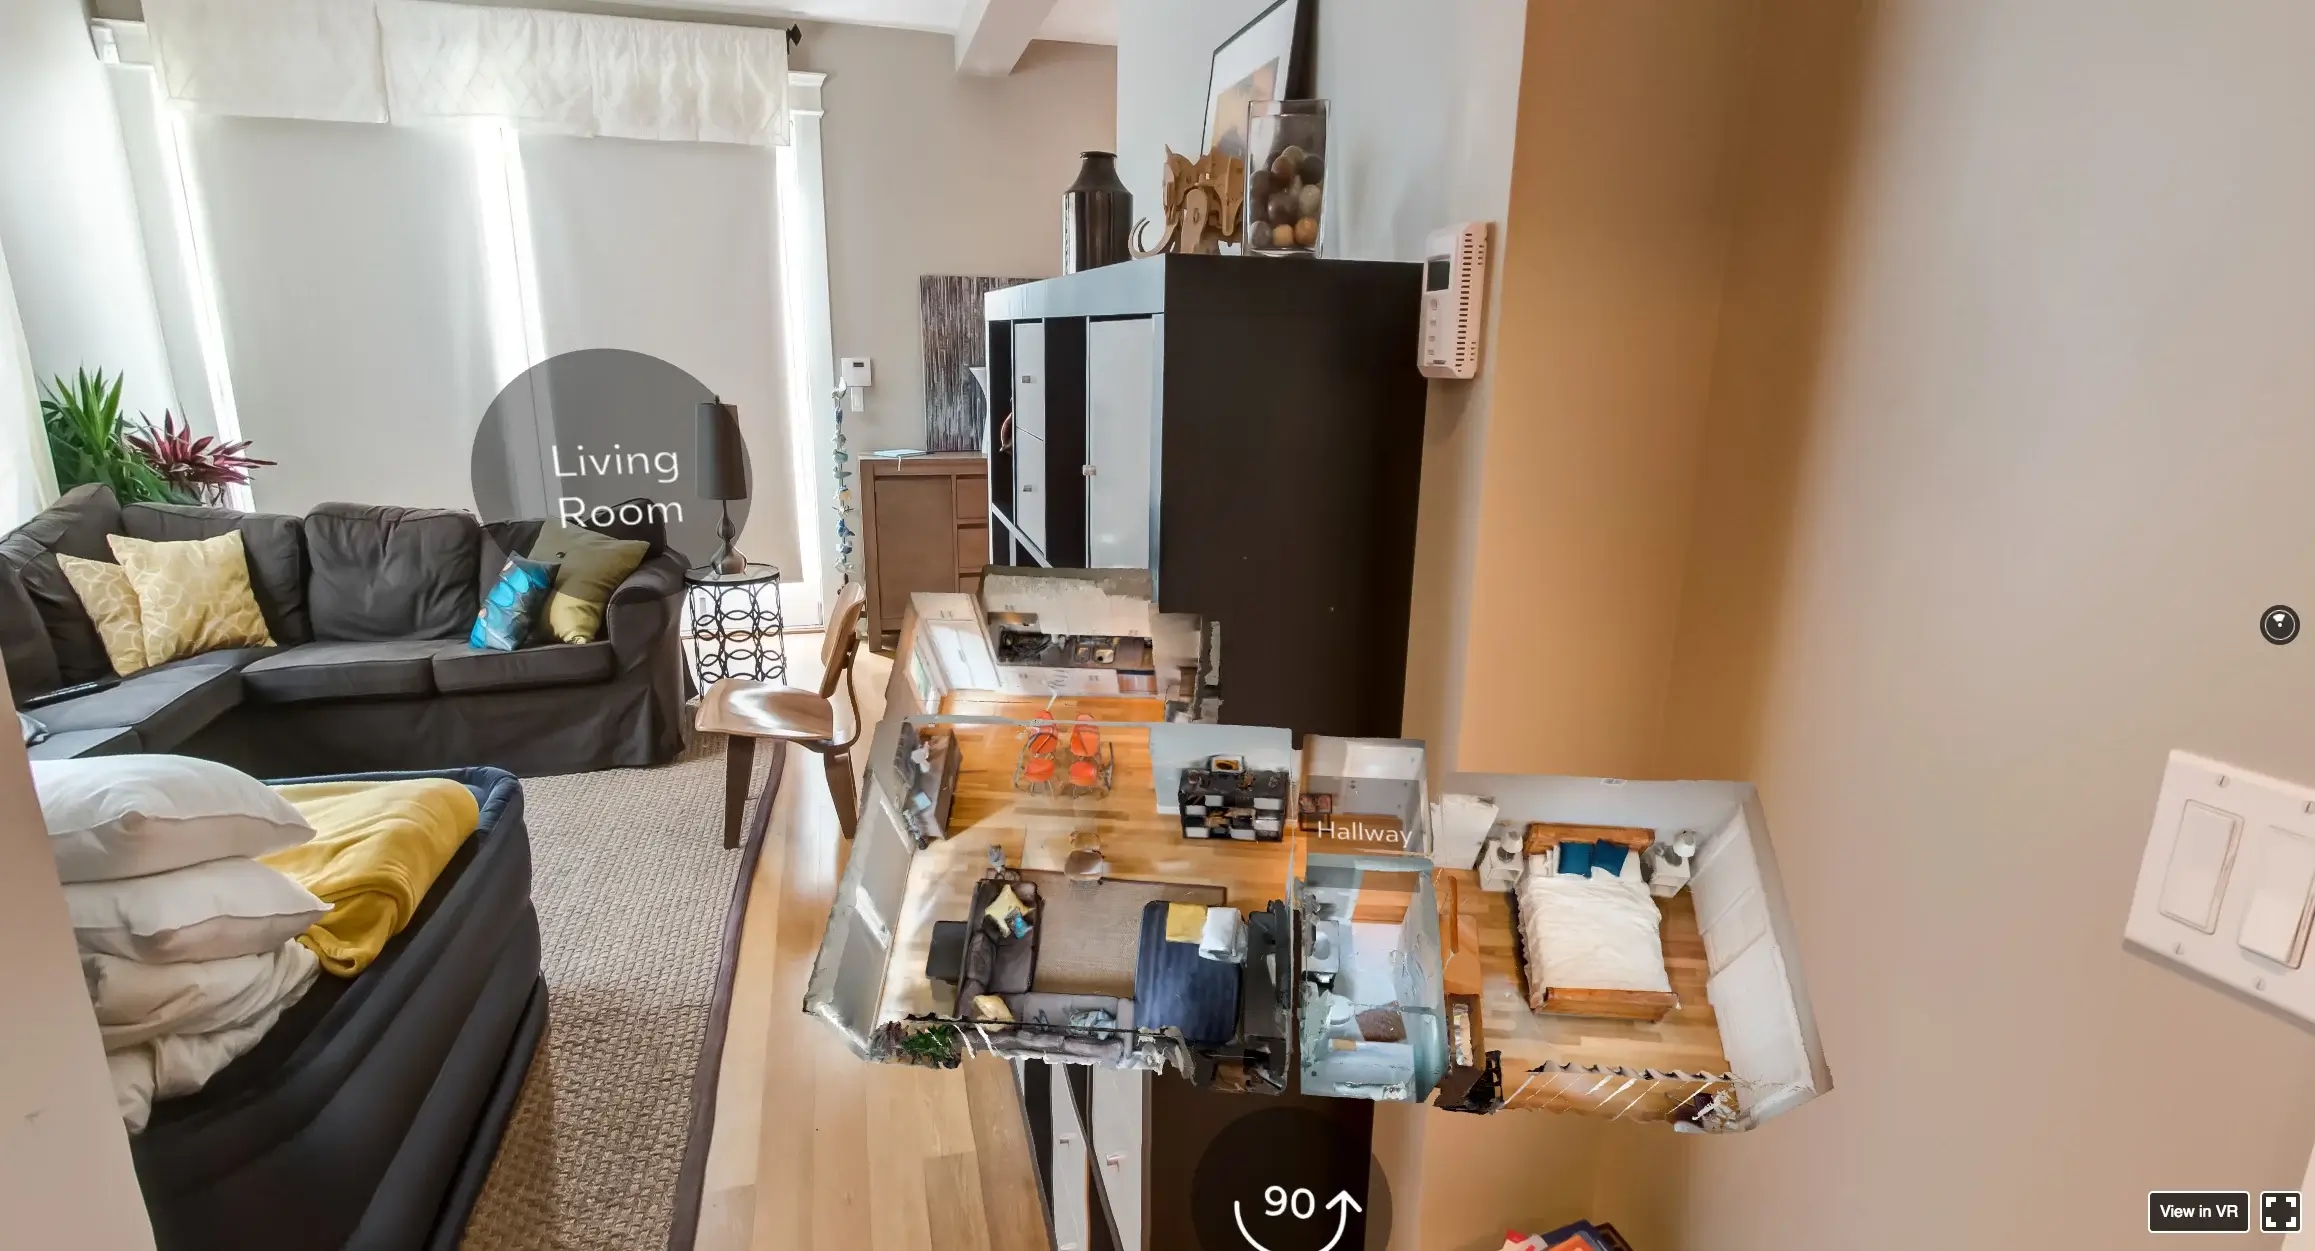 Airbnb uses Gen AI to see the accommodation options